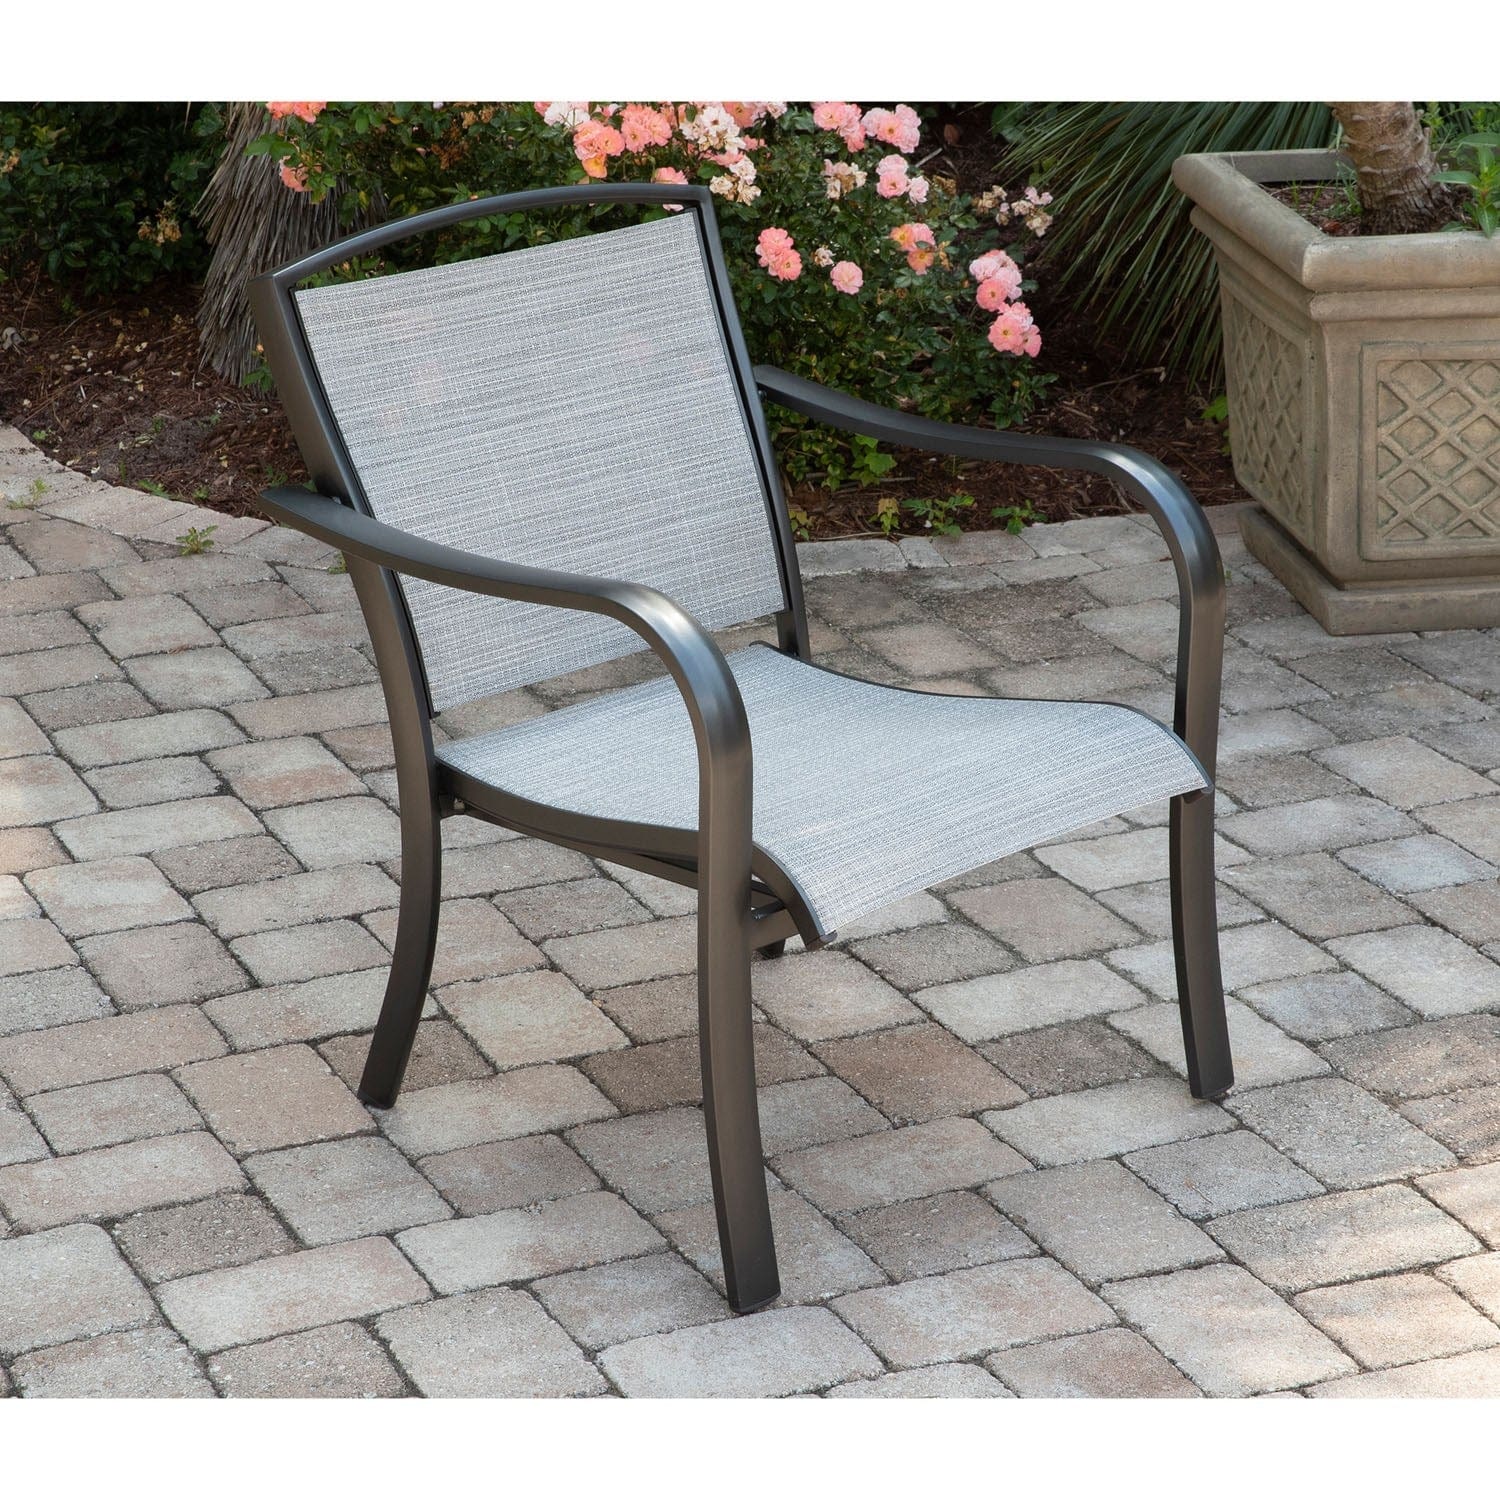 Hanover Conversation Set Hanover - Foxhill 3pc Seating Set: 2 Sling Chairs and 22" Side Table | FOXHILL3PC-GRY